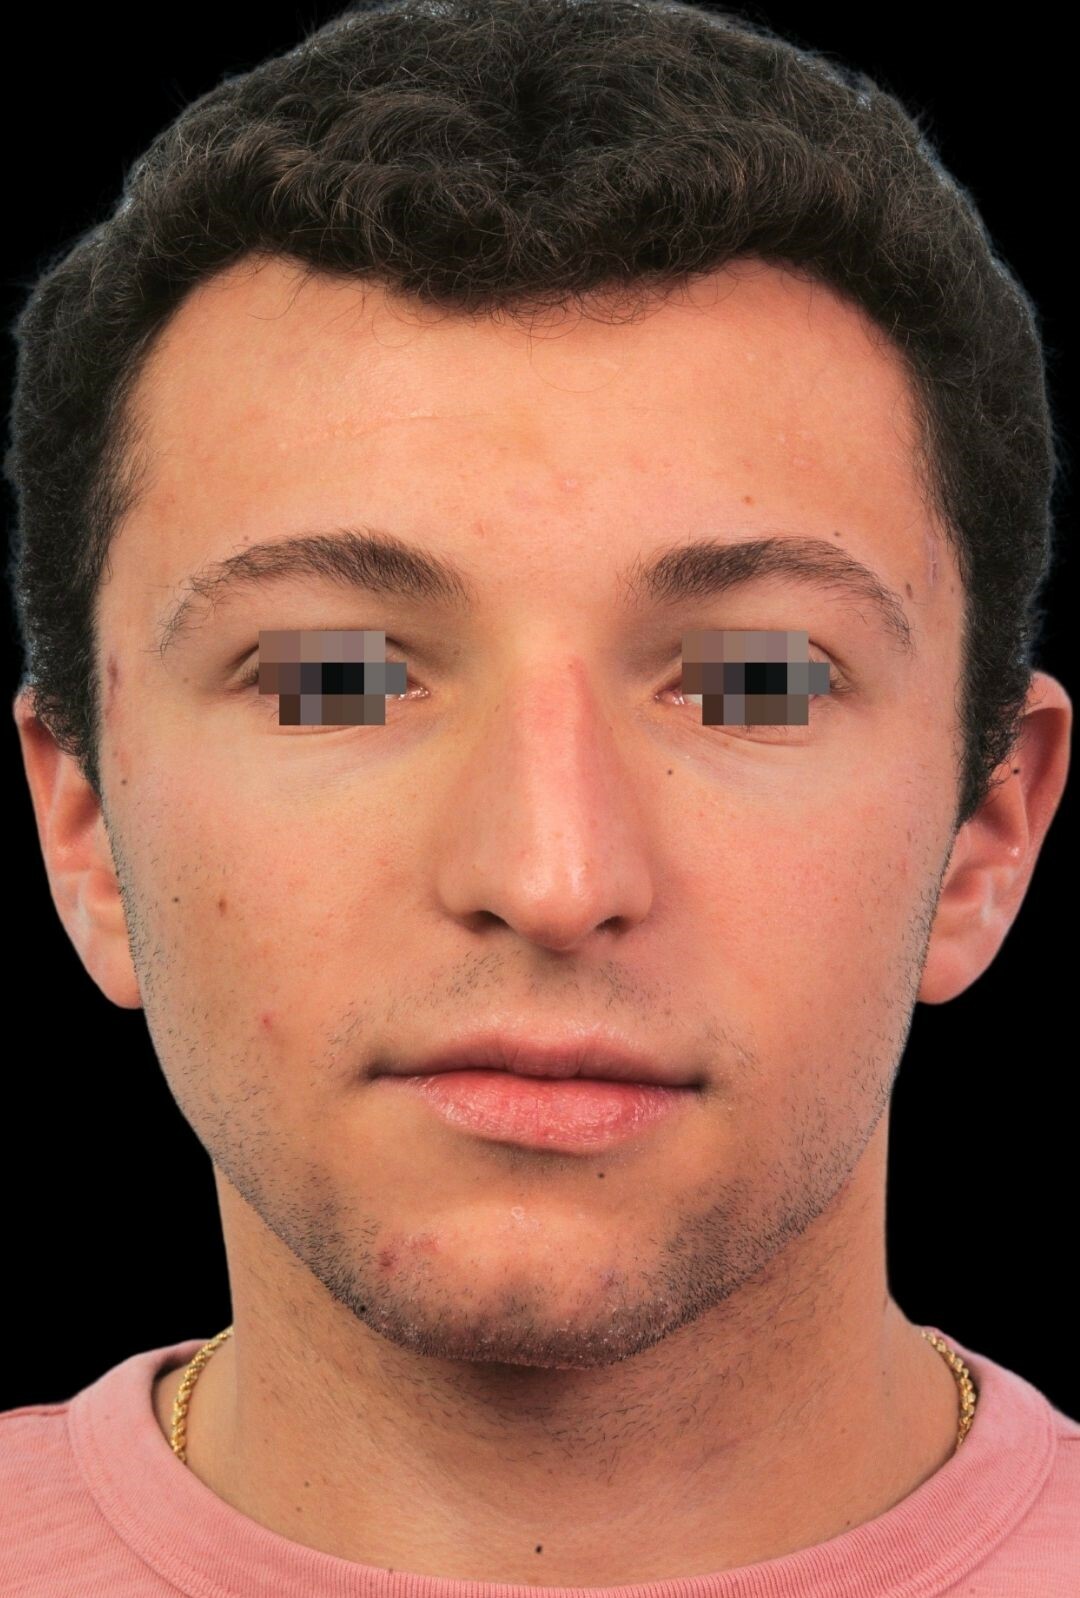 Photo of the patient’s face before the Rhinoplasty surgery. Patient 7 - Set 3